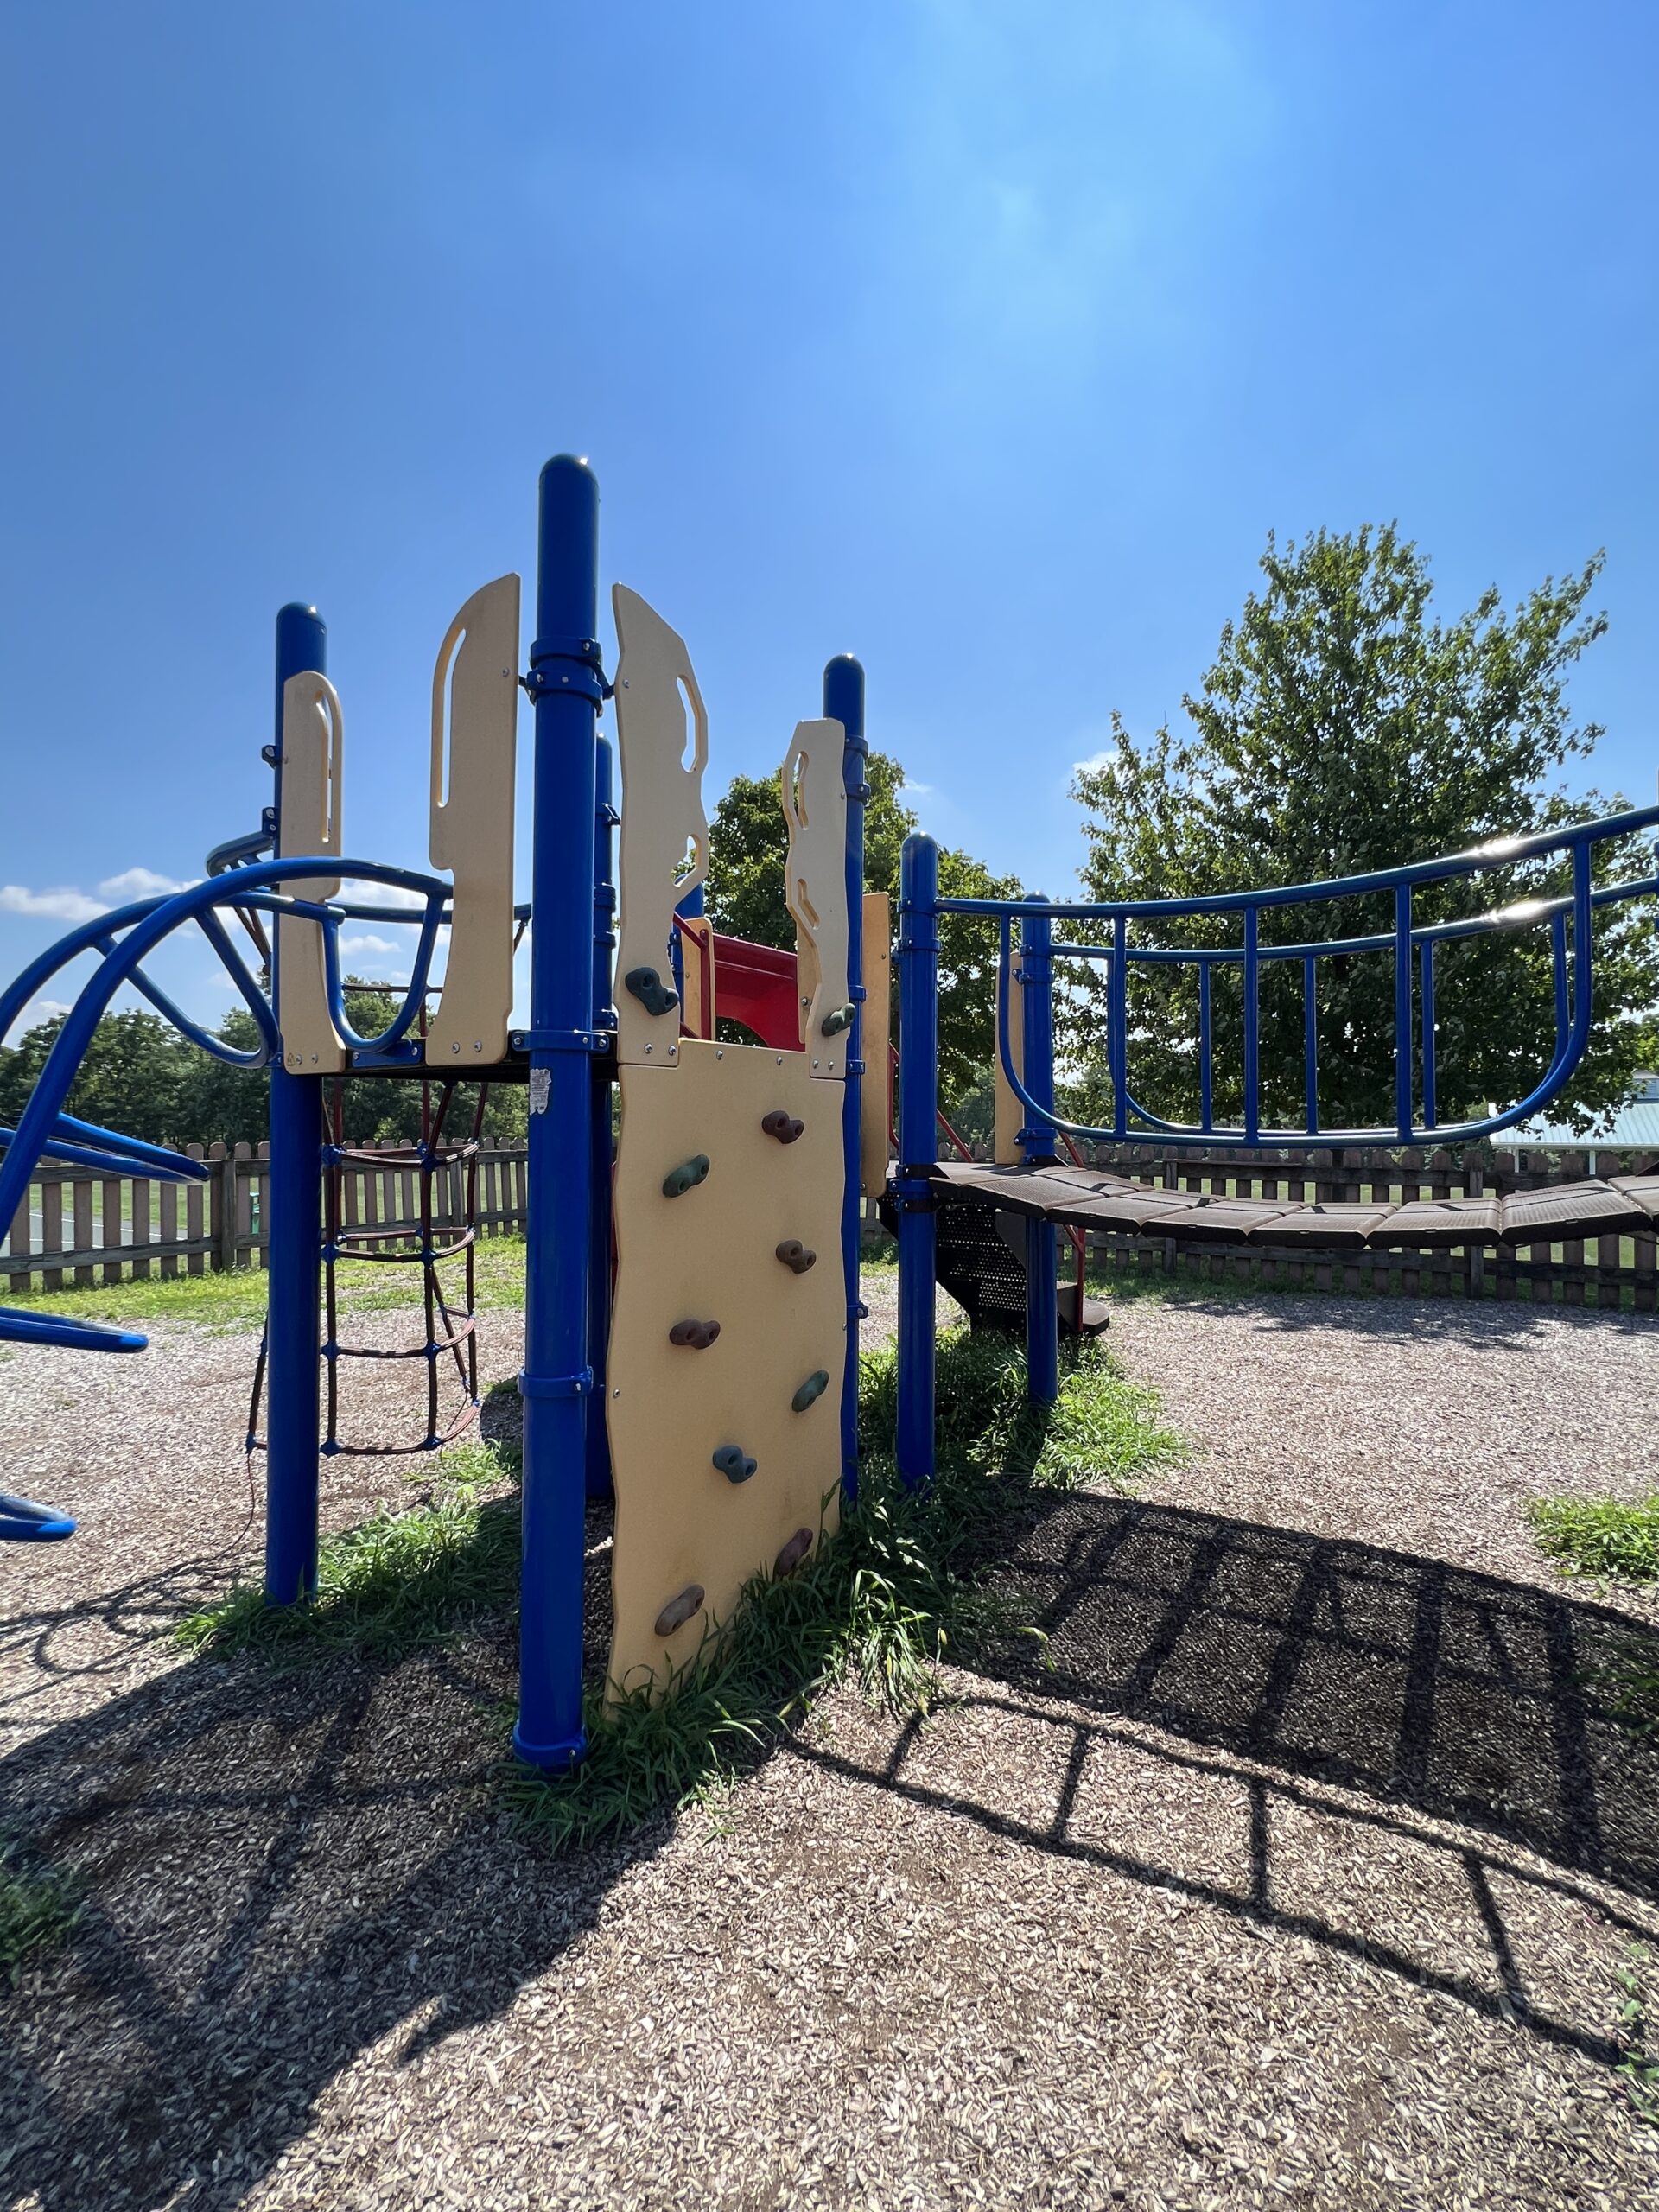 Alexandria Township Park Playground in Milford NJ - Features - rock climbing wall and bridge